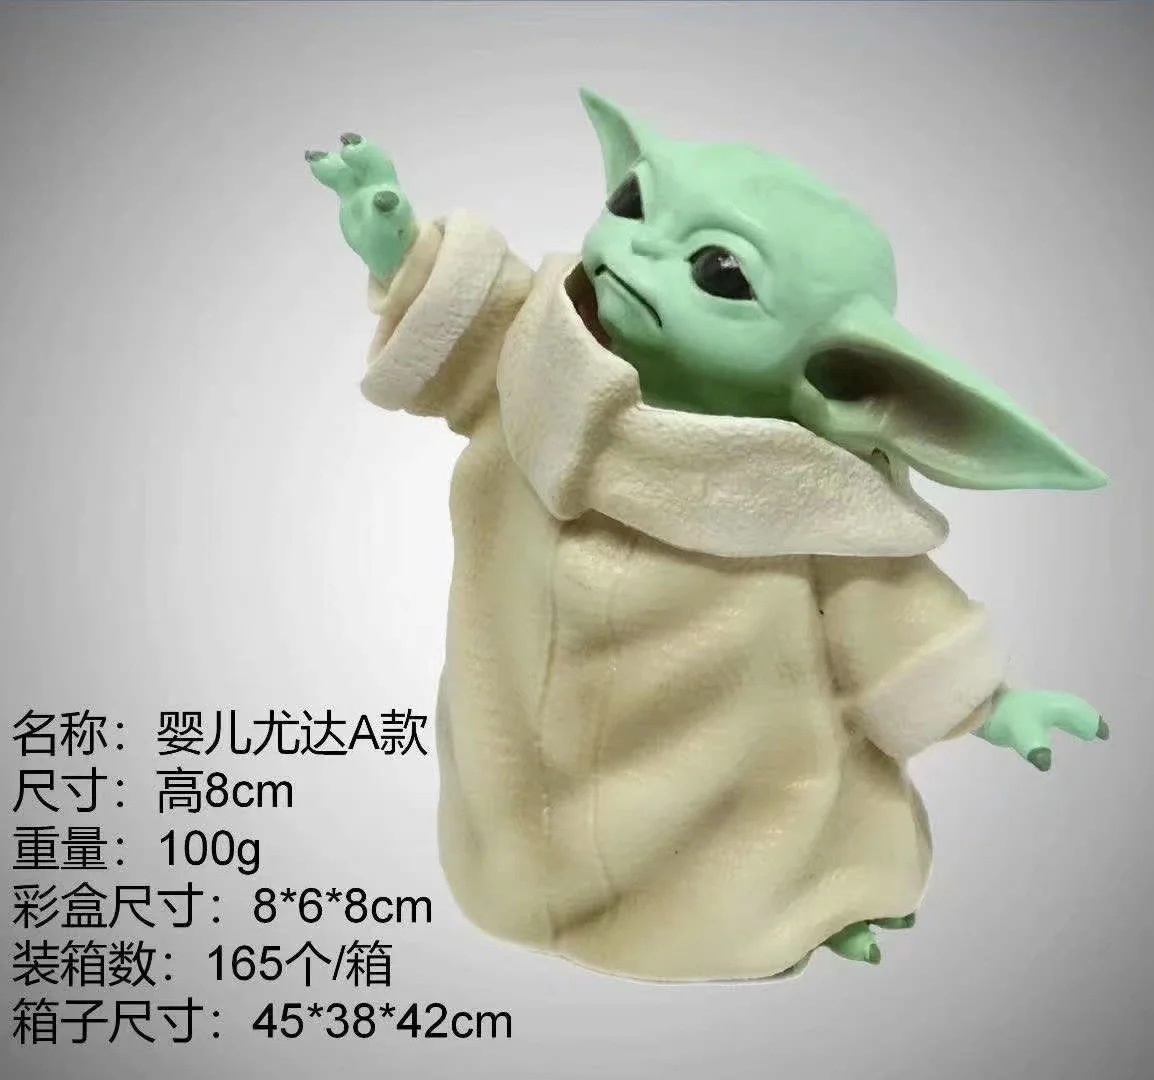 Anime Wholesale The Force Awakens A Section Yoda Master Q Version Doll Model Ornament